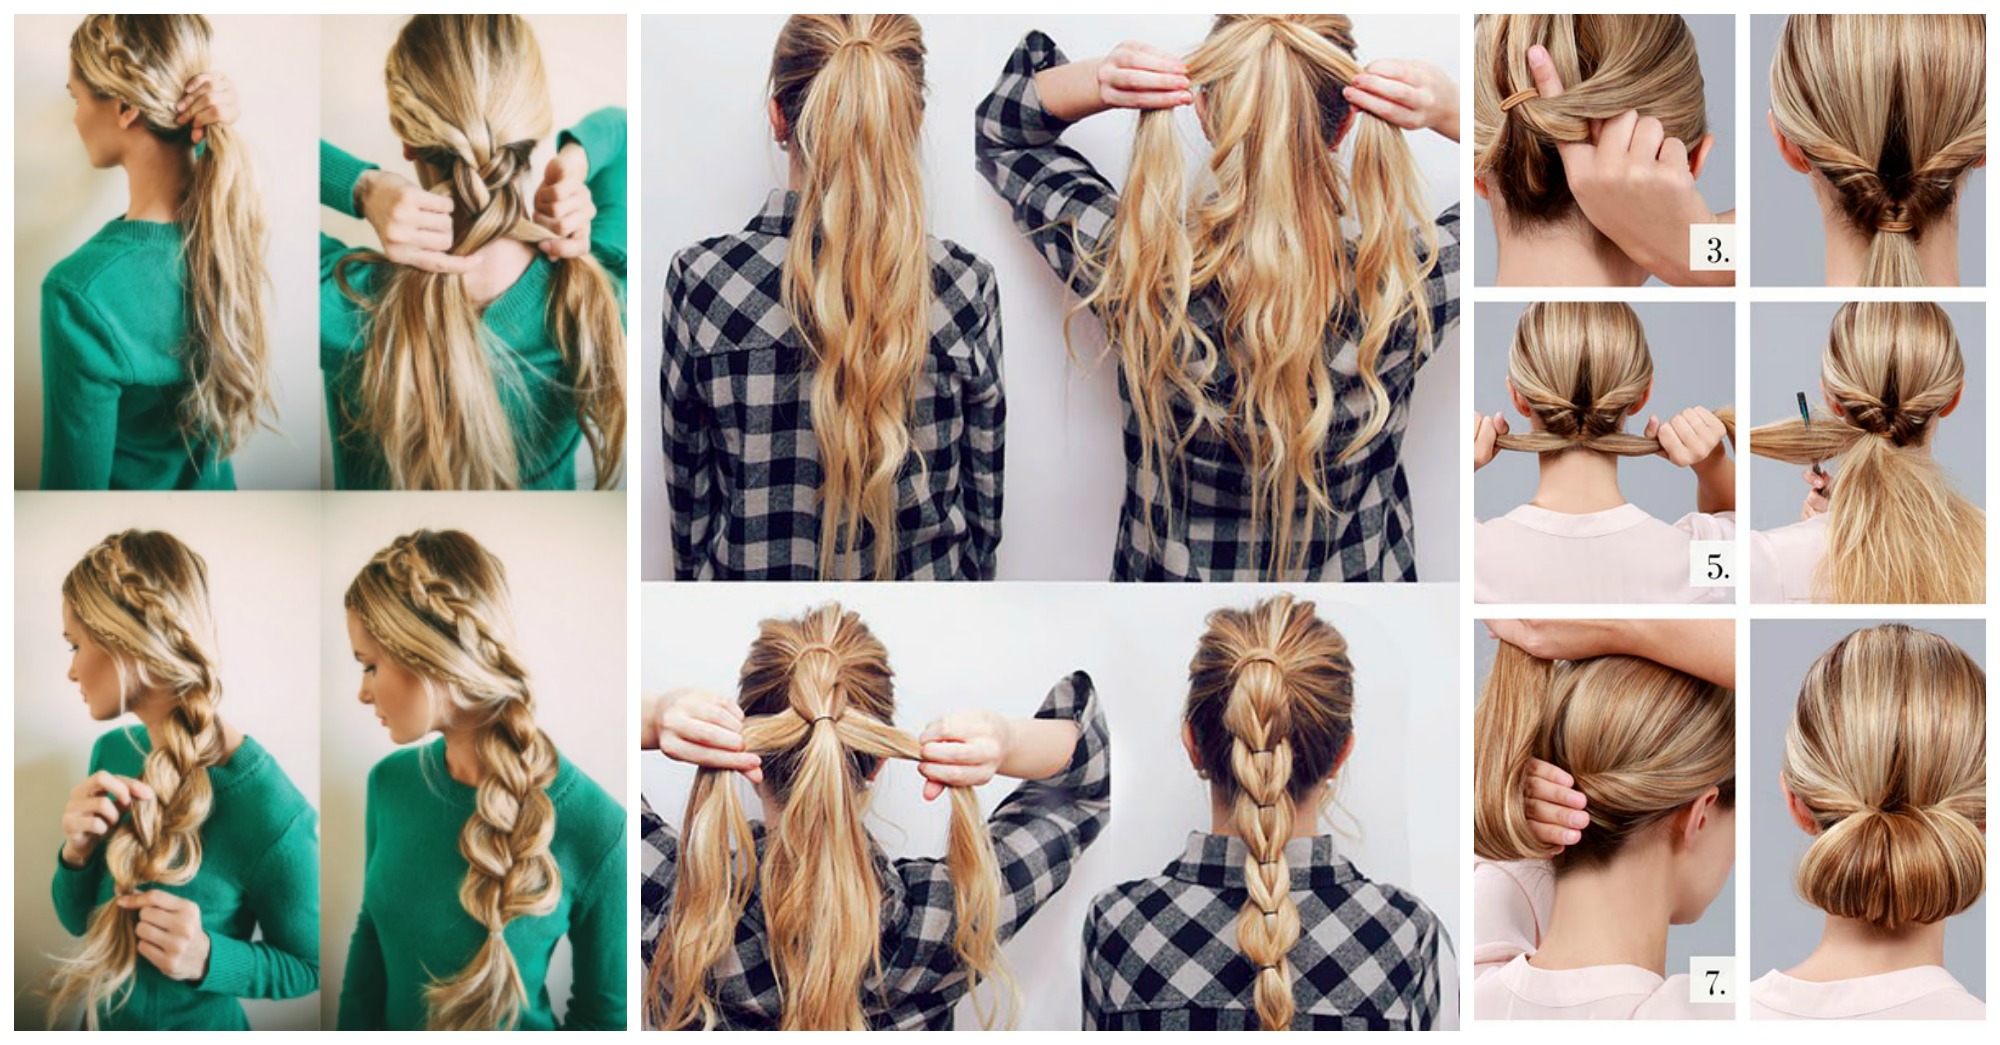 15 Step by Step Hairstyle Tutorials to Do in Less Than 5 Min